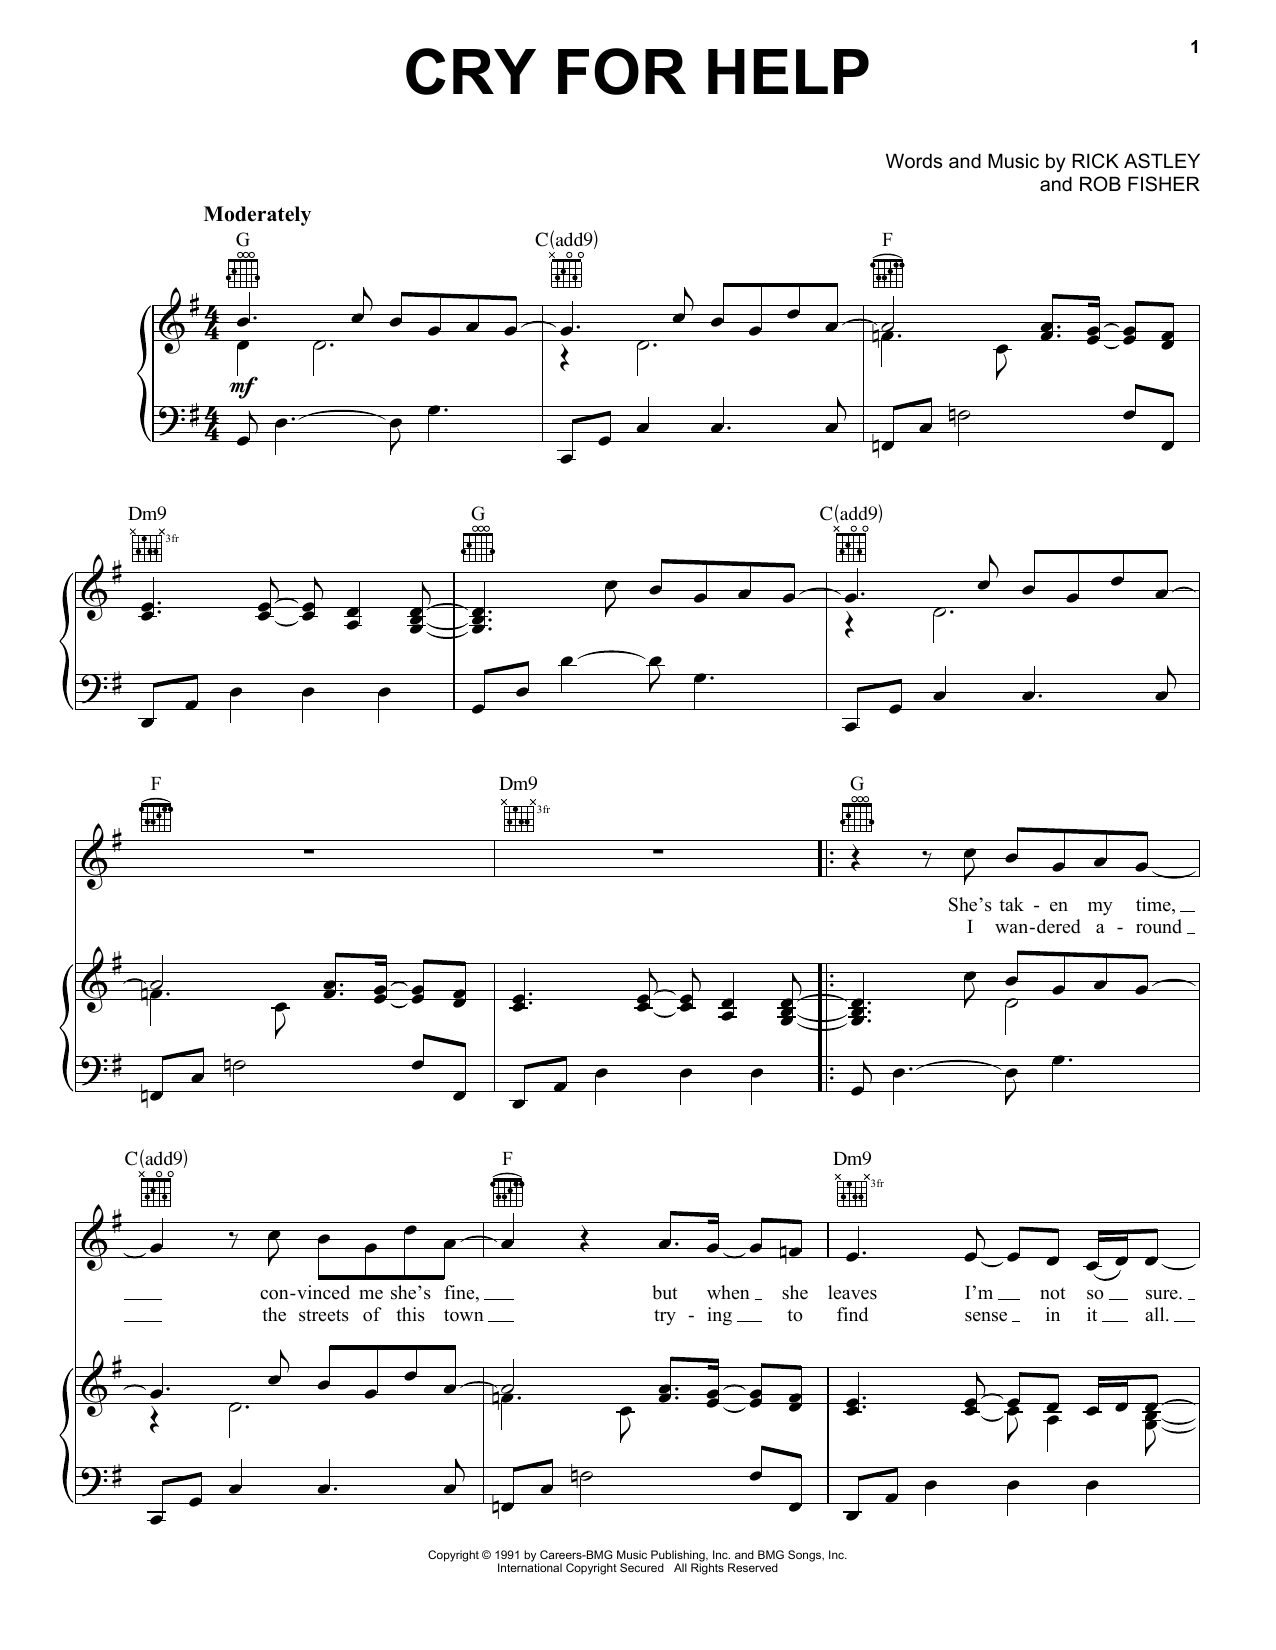 Download Rick Astley Cry For Help Sheet Music